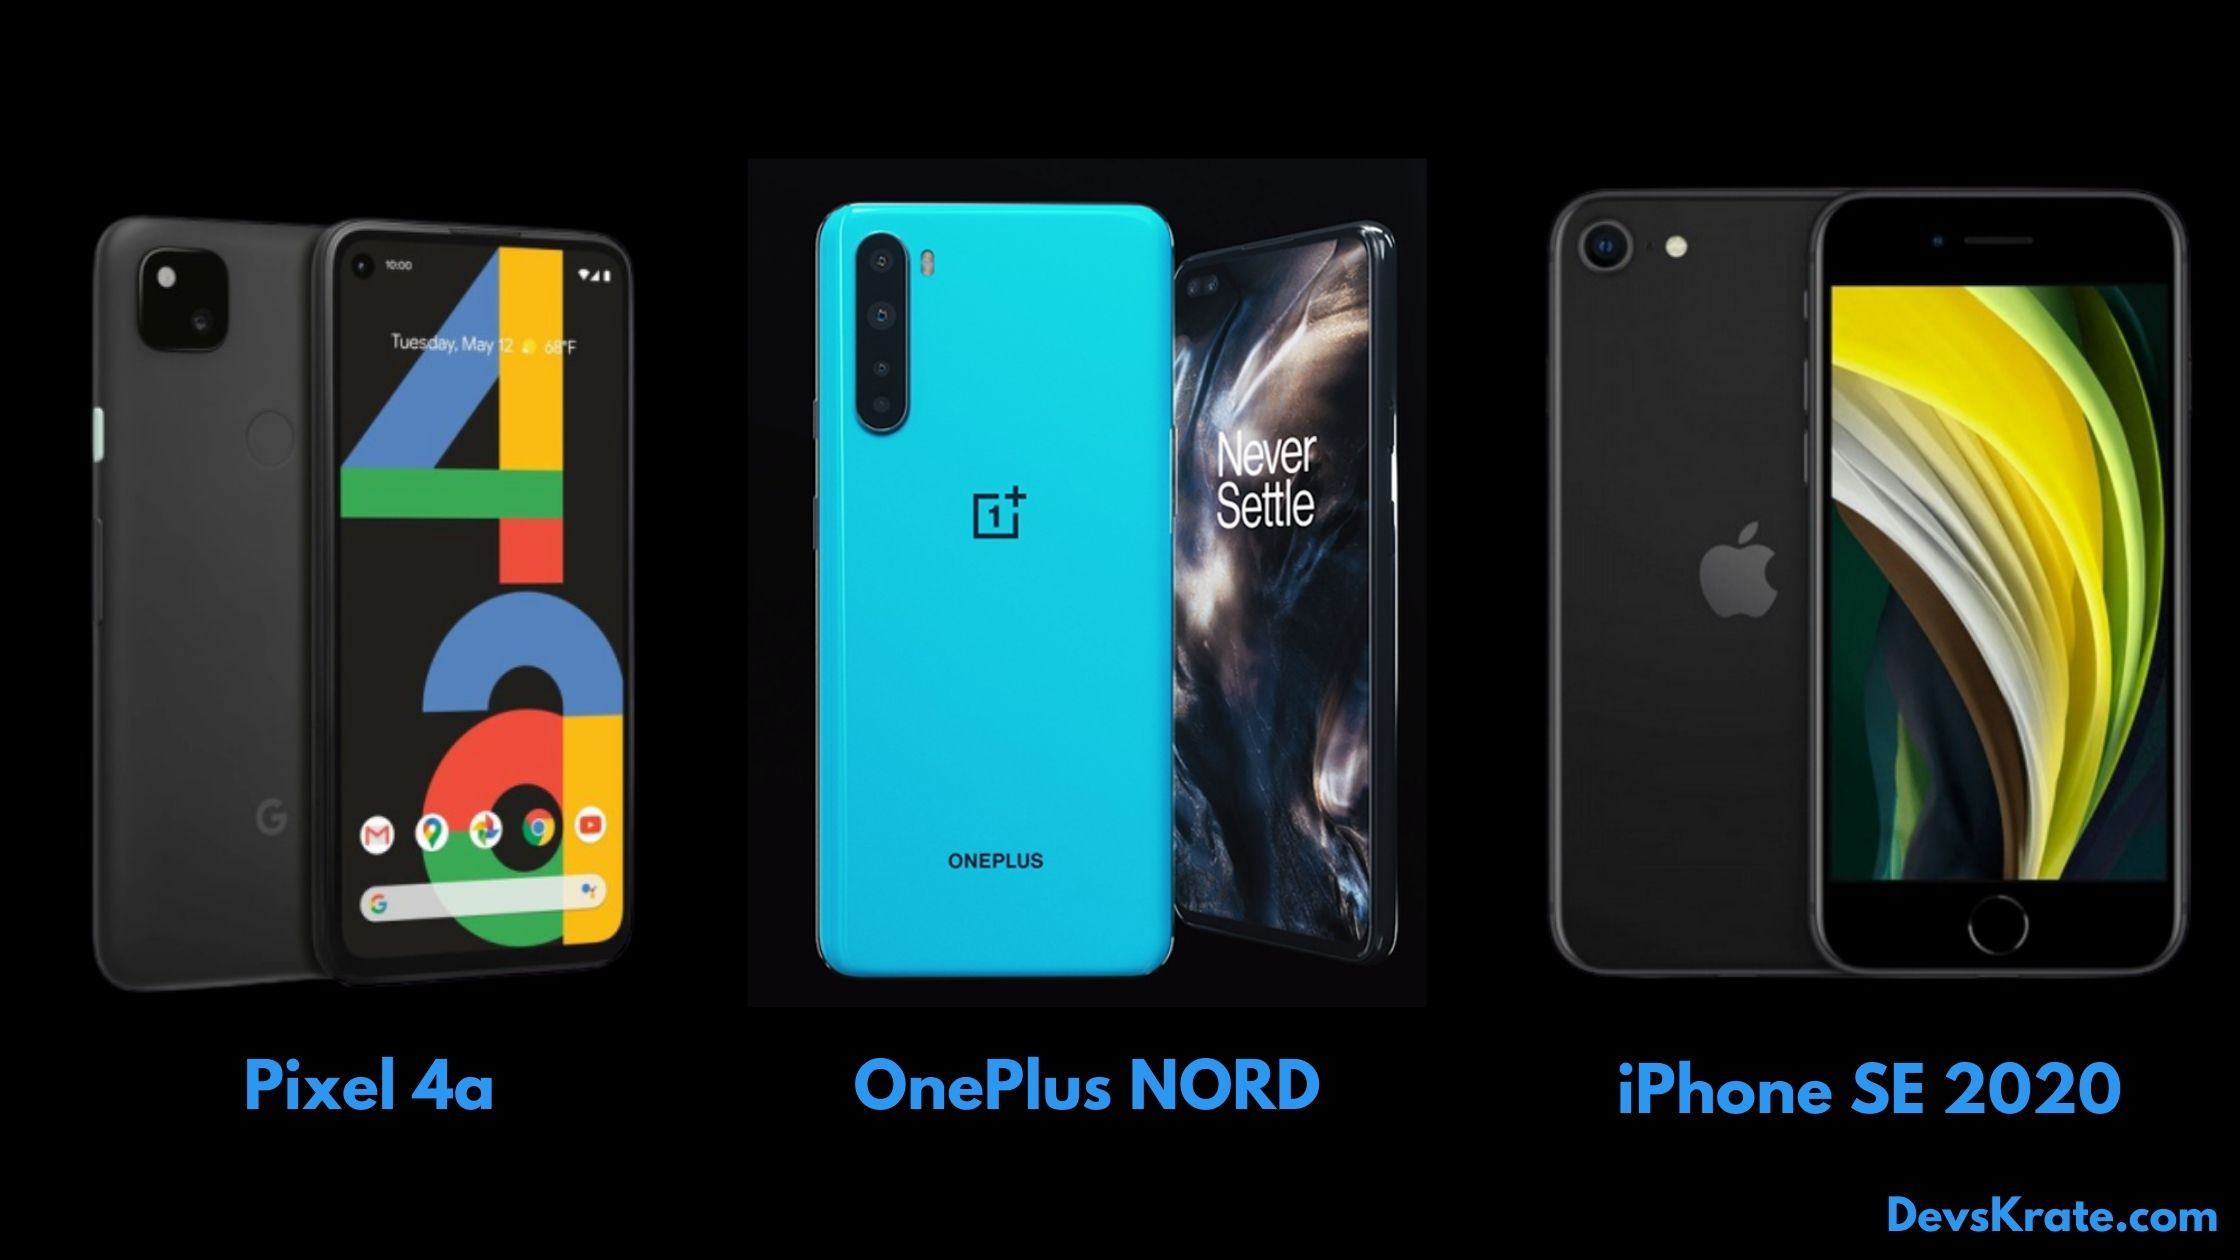 Pixel 4a V/S iPhone SE V/S OnePlus Nord